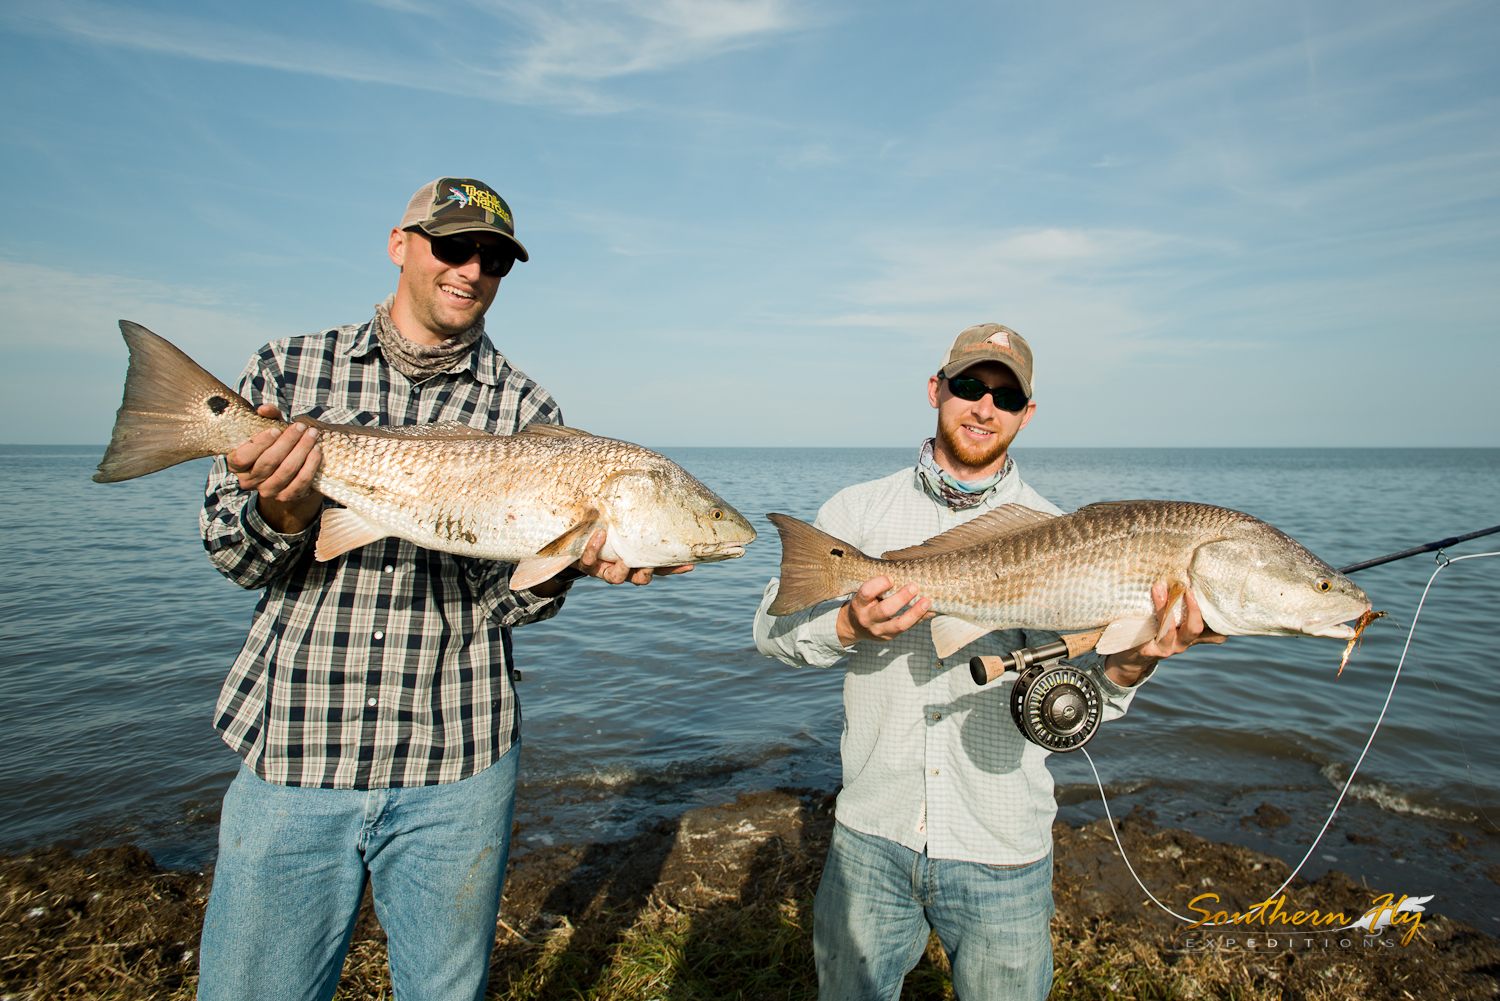 Fly fishing new orleans southern fly expeditions 